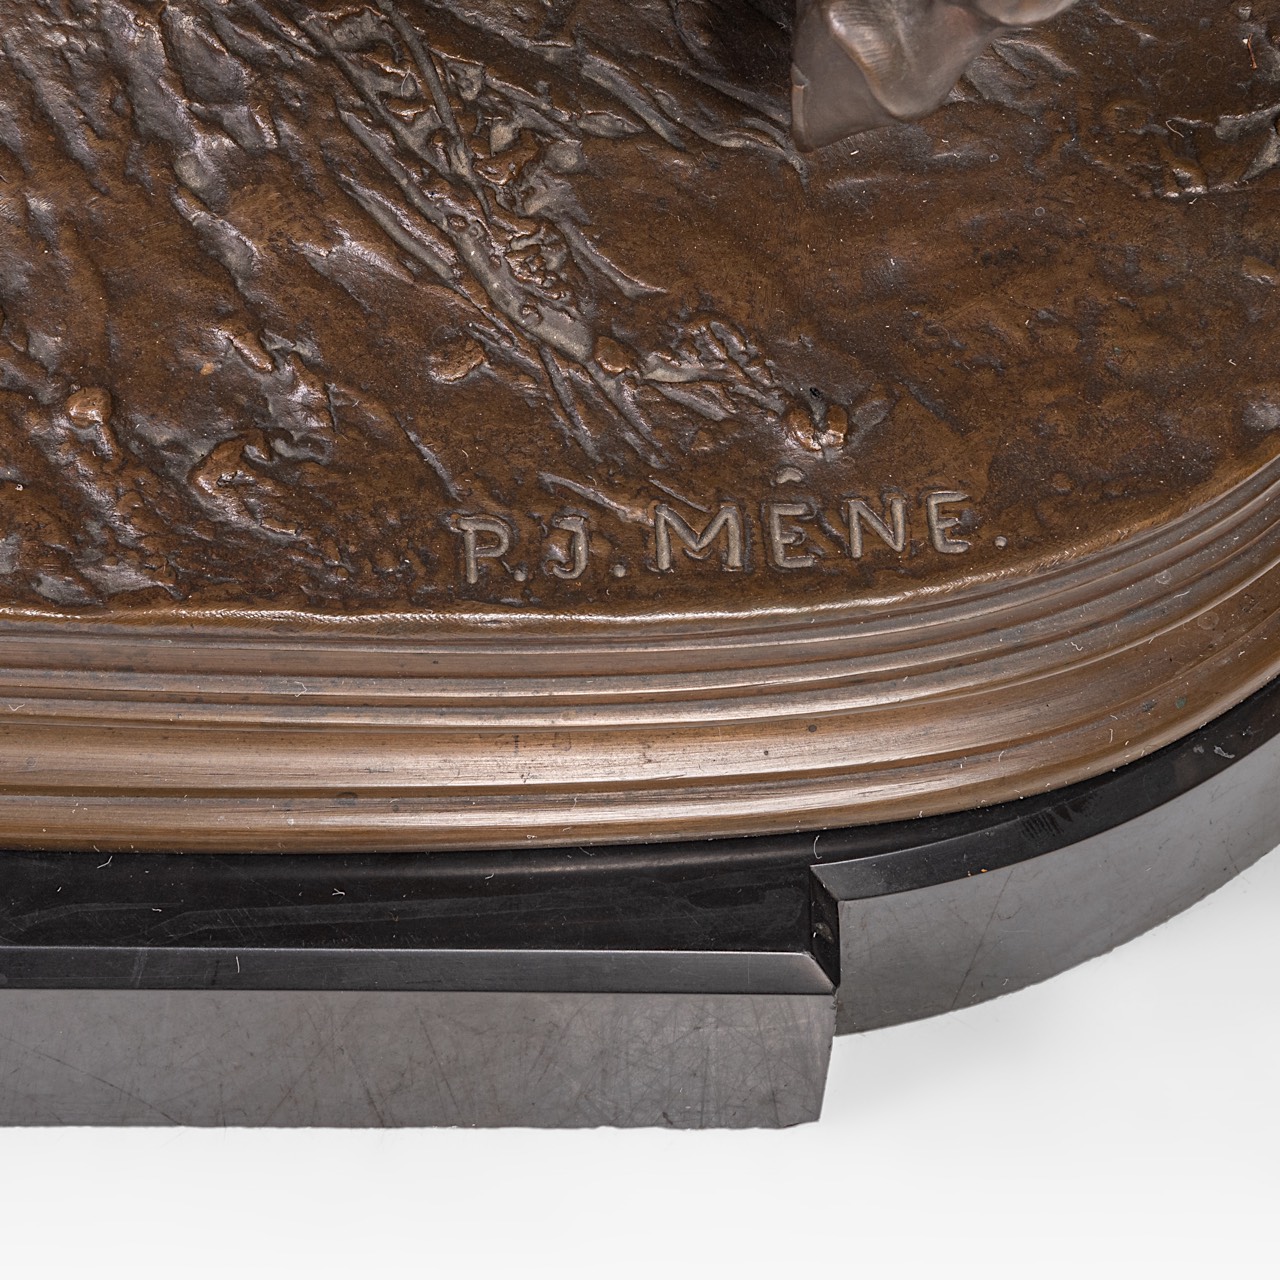 Pierre-Jules Mene (1810-1879), the falconer, patinated bronze on a black marble base, casted by Barb - Image 9 of 11